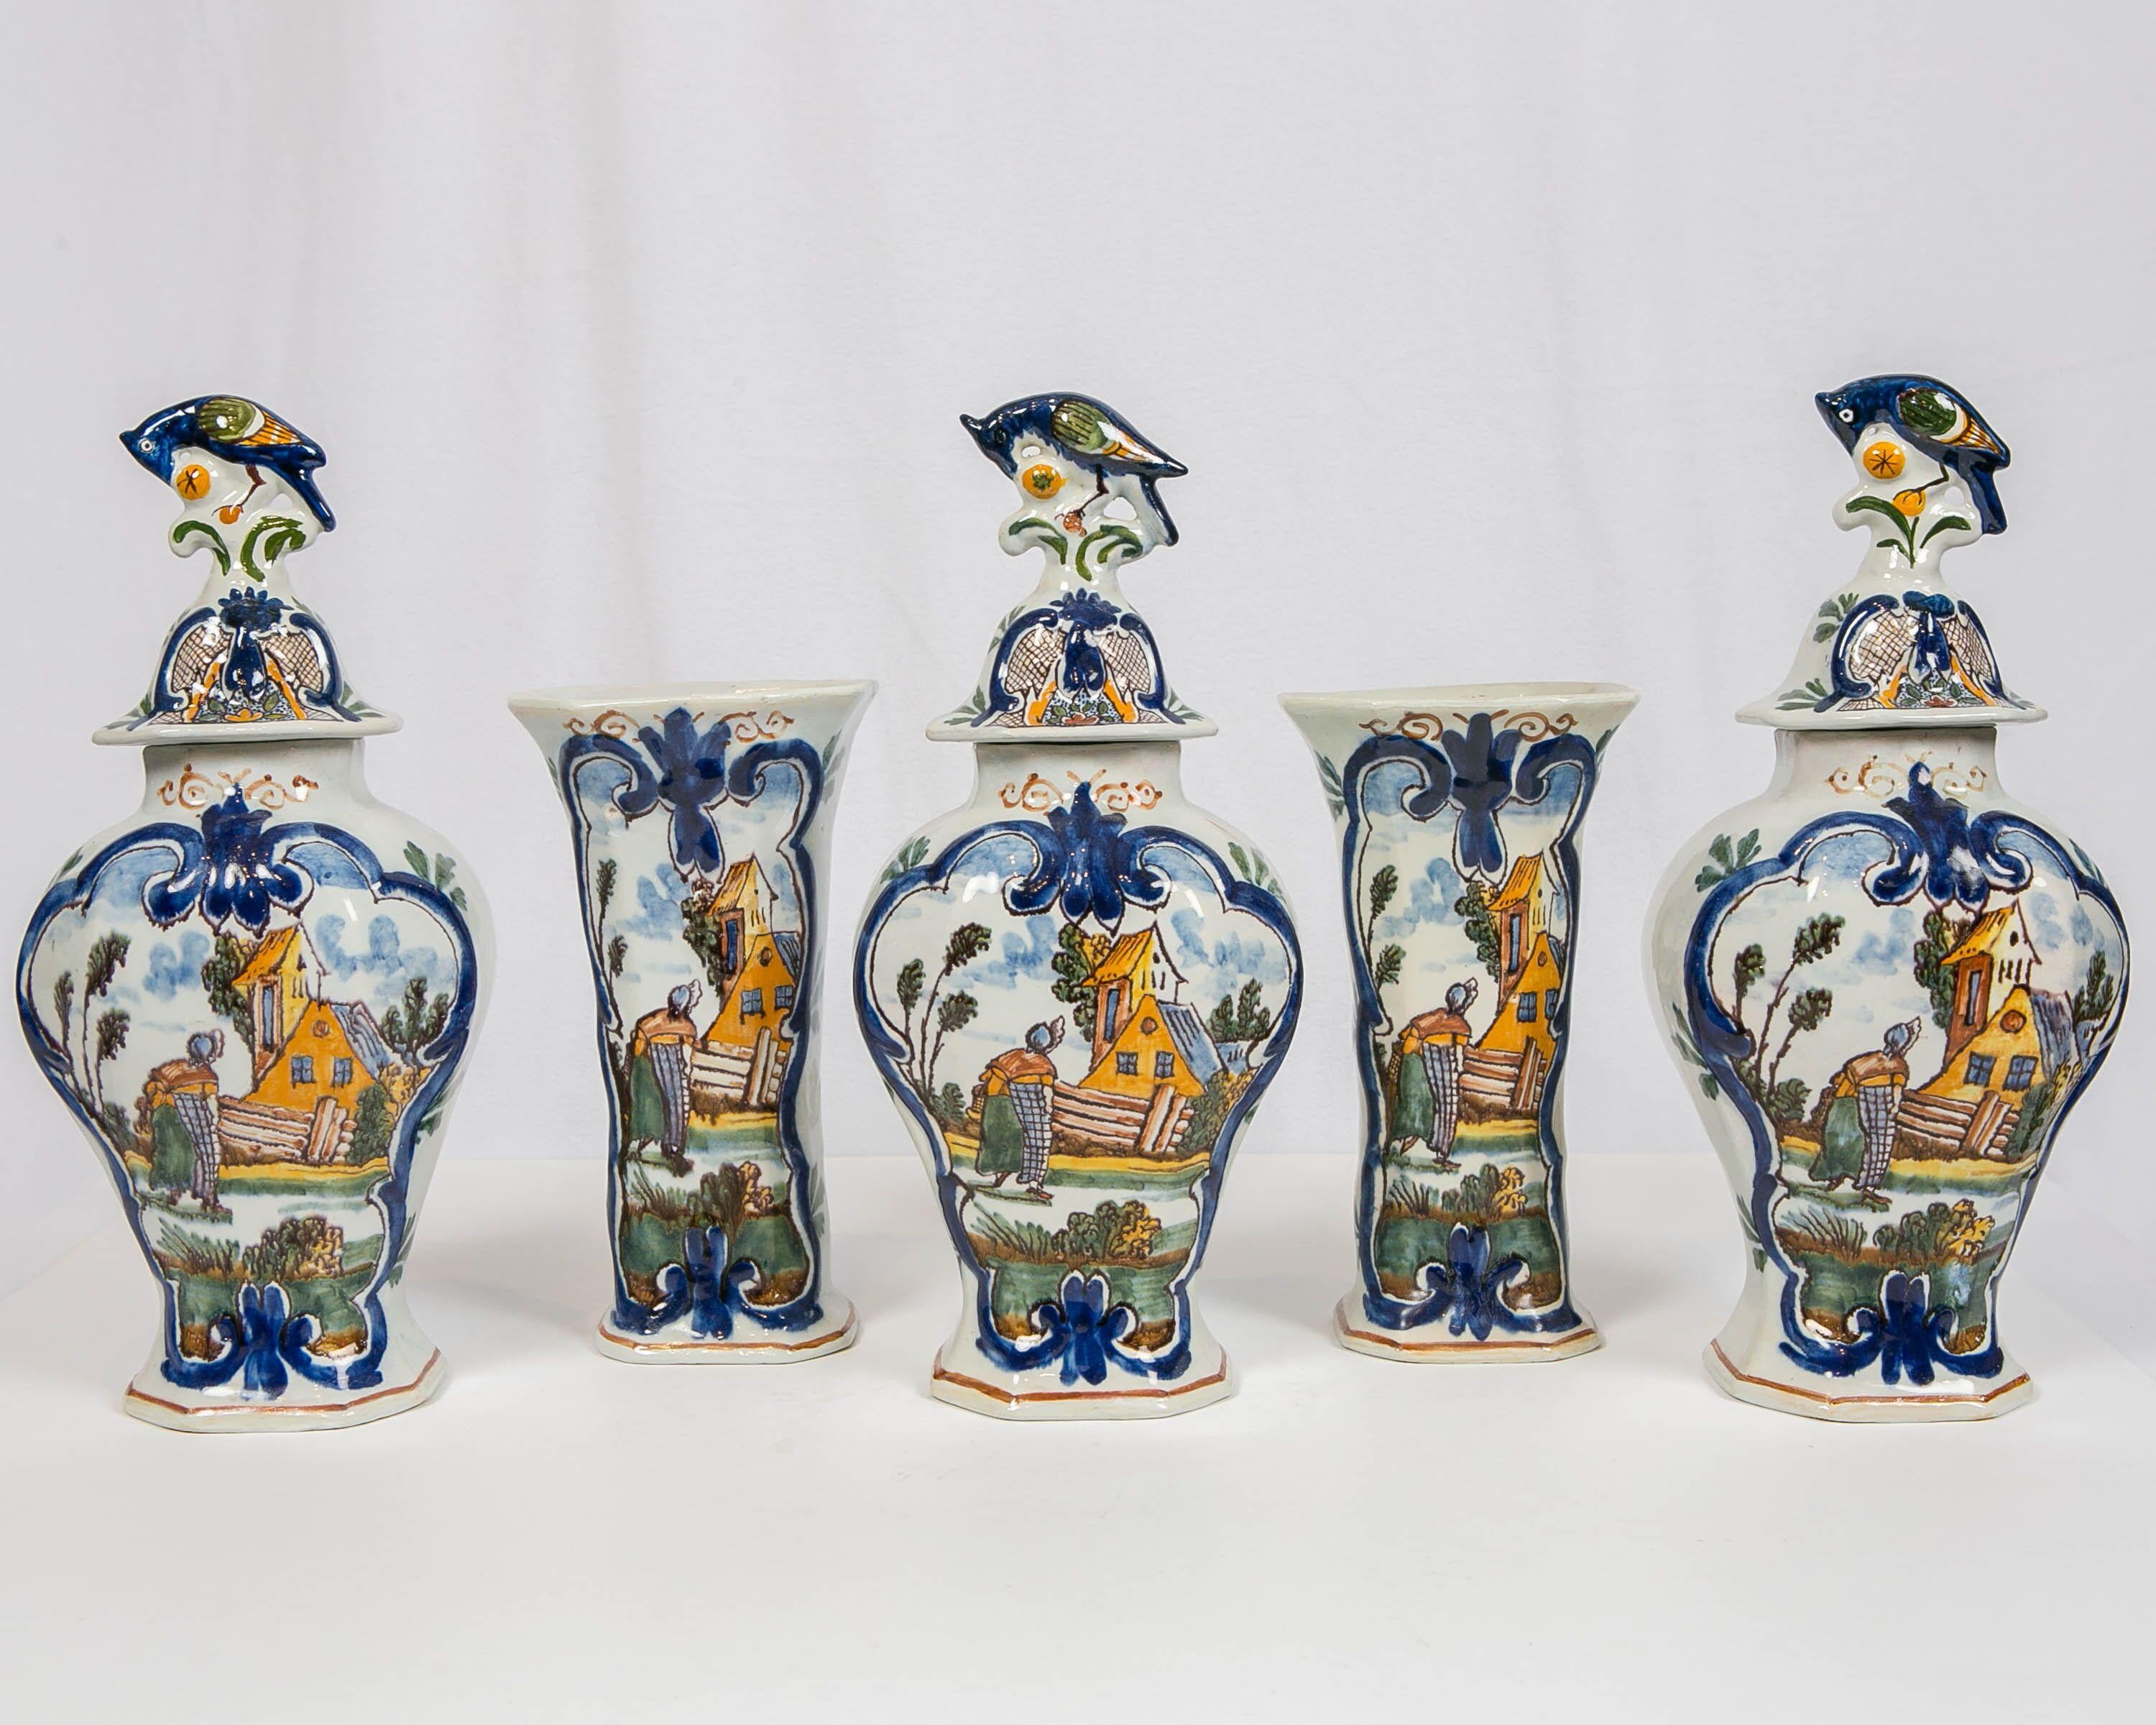 A five-piece mantle garniture comprising three covered vases and a pair of beakers. Made in the Netherlands circa 1750, the jars are each hand-painted on the front with a brightly colored polychrome scene showing a Dutch peasant woman returning home